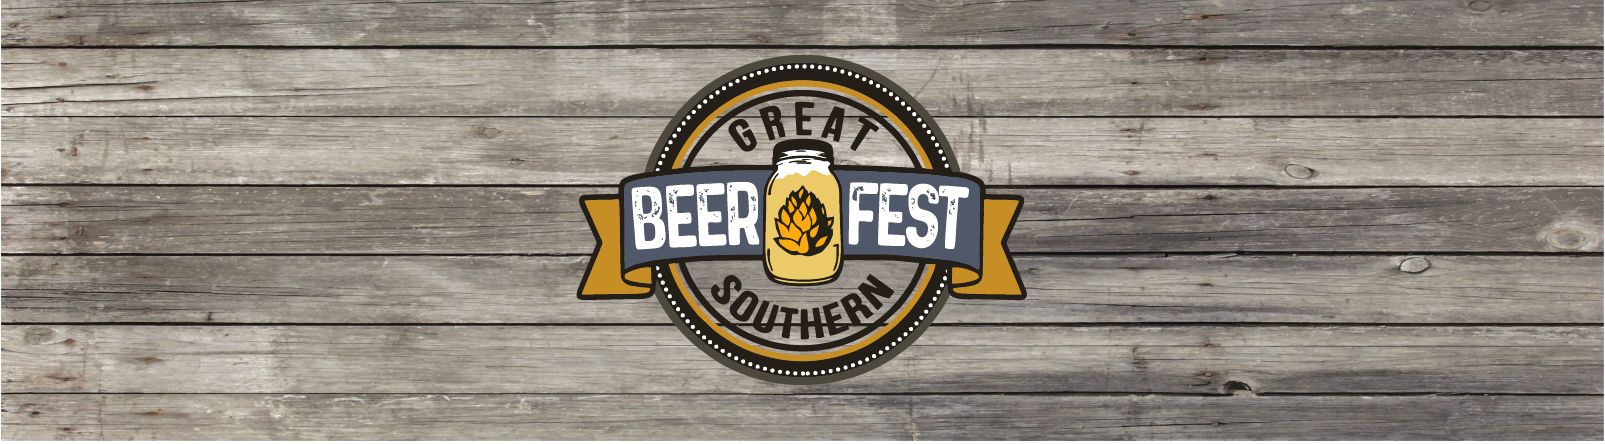 Great Southern Beer Fest - Birmingham Edition banner image